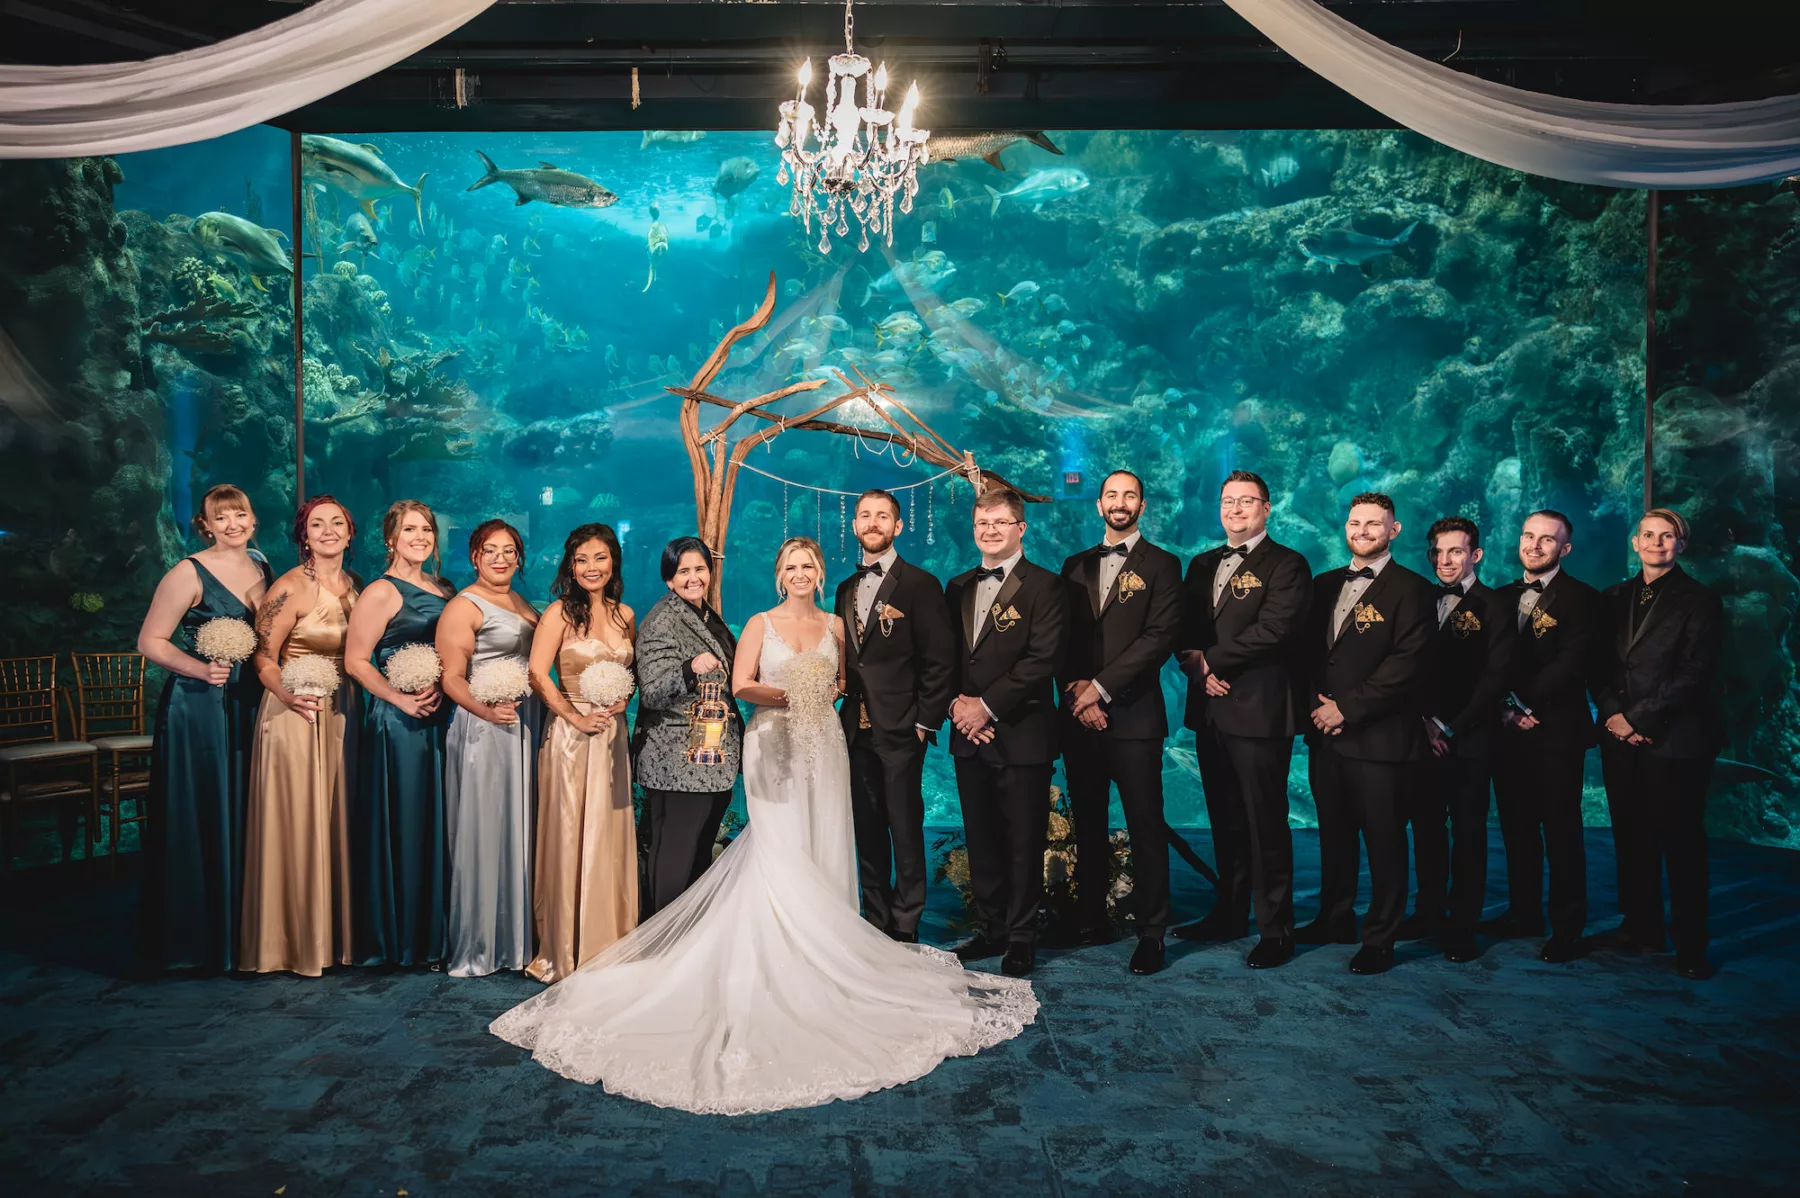 Mismatched Emerald, Sage, and Gold Satin Floor Length Bridesmaid Dress Ideas | Unique Pearl Bridal Bouquet Inspiration | Ivory A Line Lace and Tulle Morilee Wedding Dress | Black Tuxedo Groomsmen Wedding Attire | Coral Reef Gallery | Event Venue The Florida Aquarium